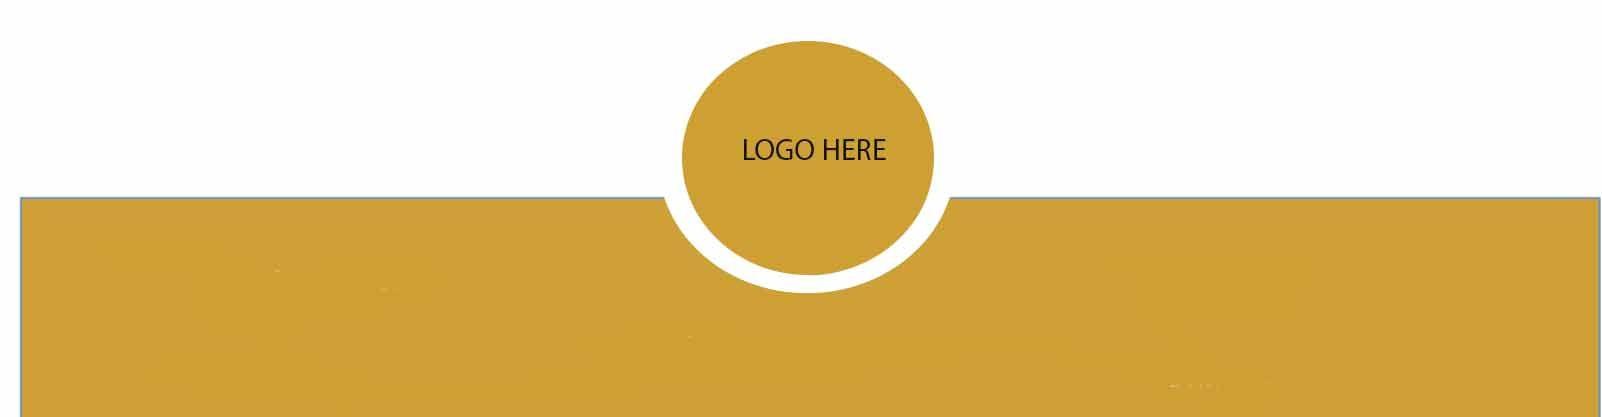 Orange Semicircle Logo - How to create a CSS semi circle with logo inside? - Stack Overflow